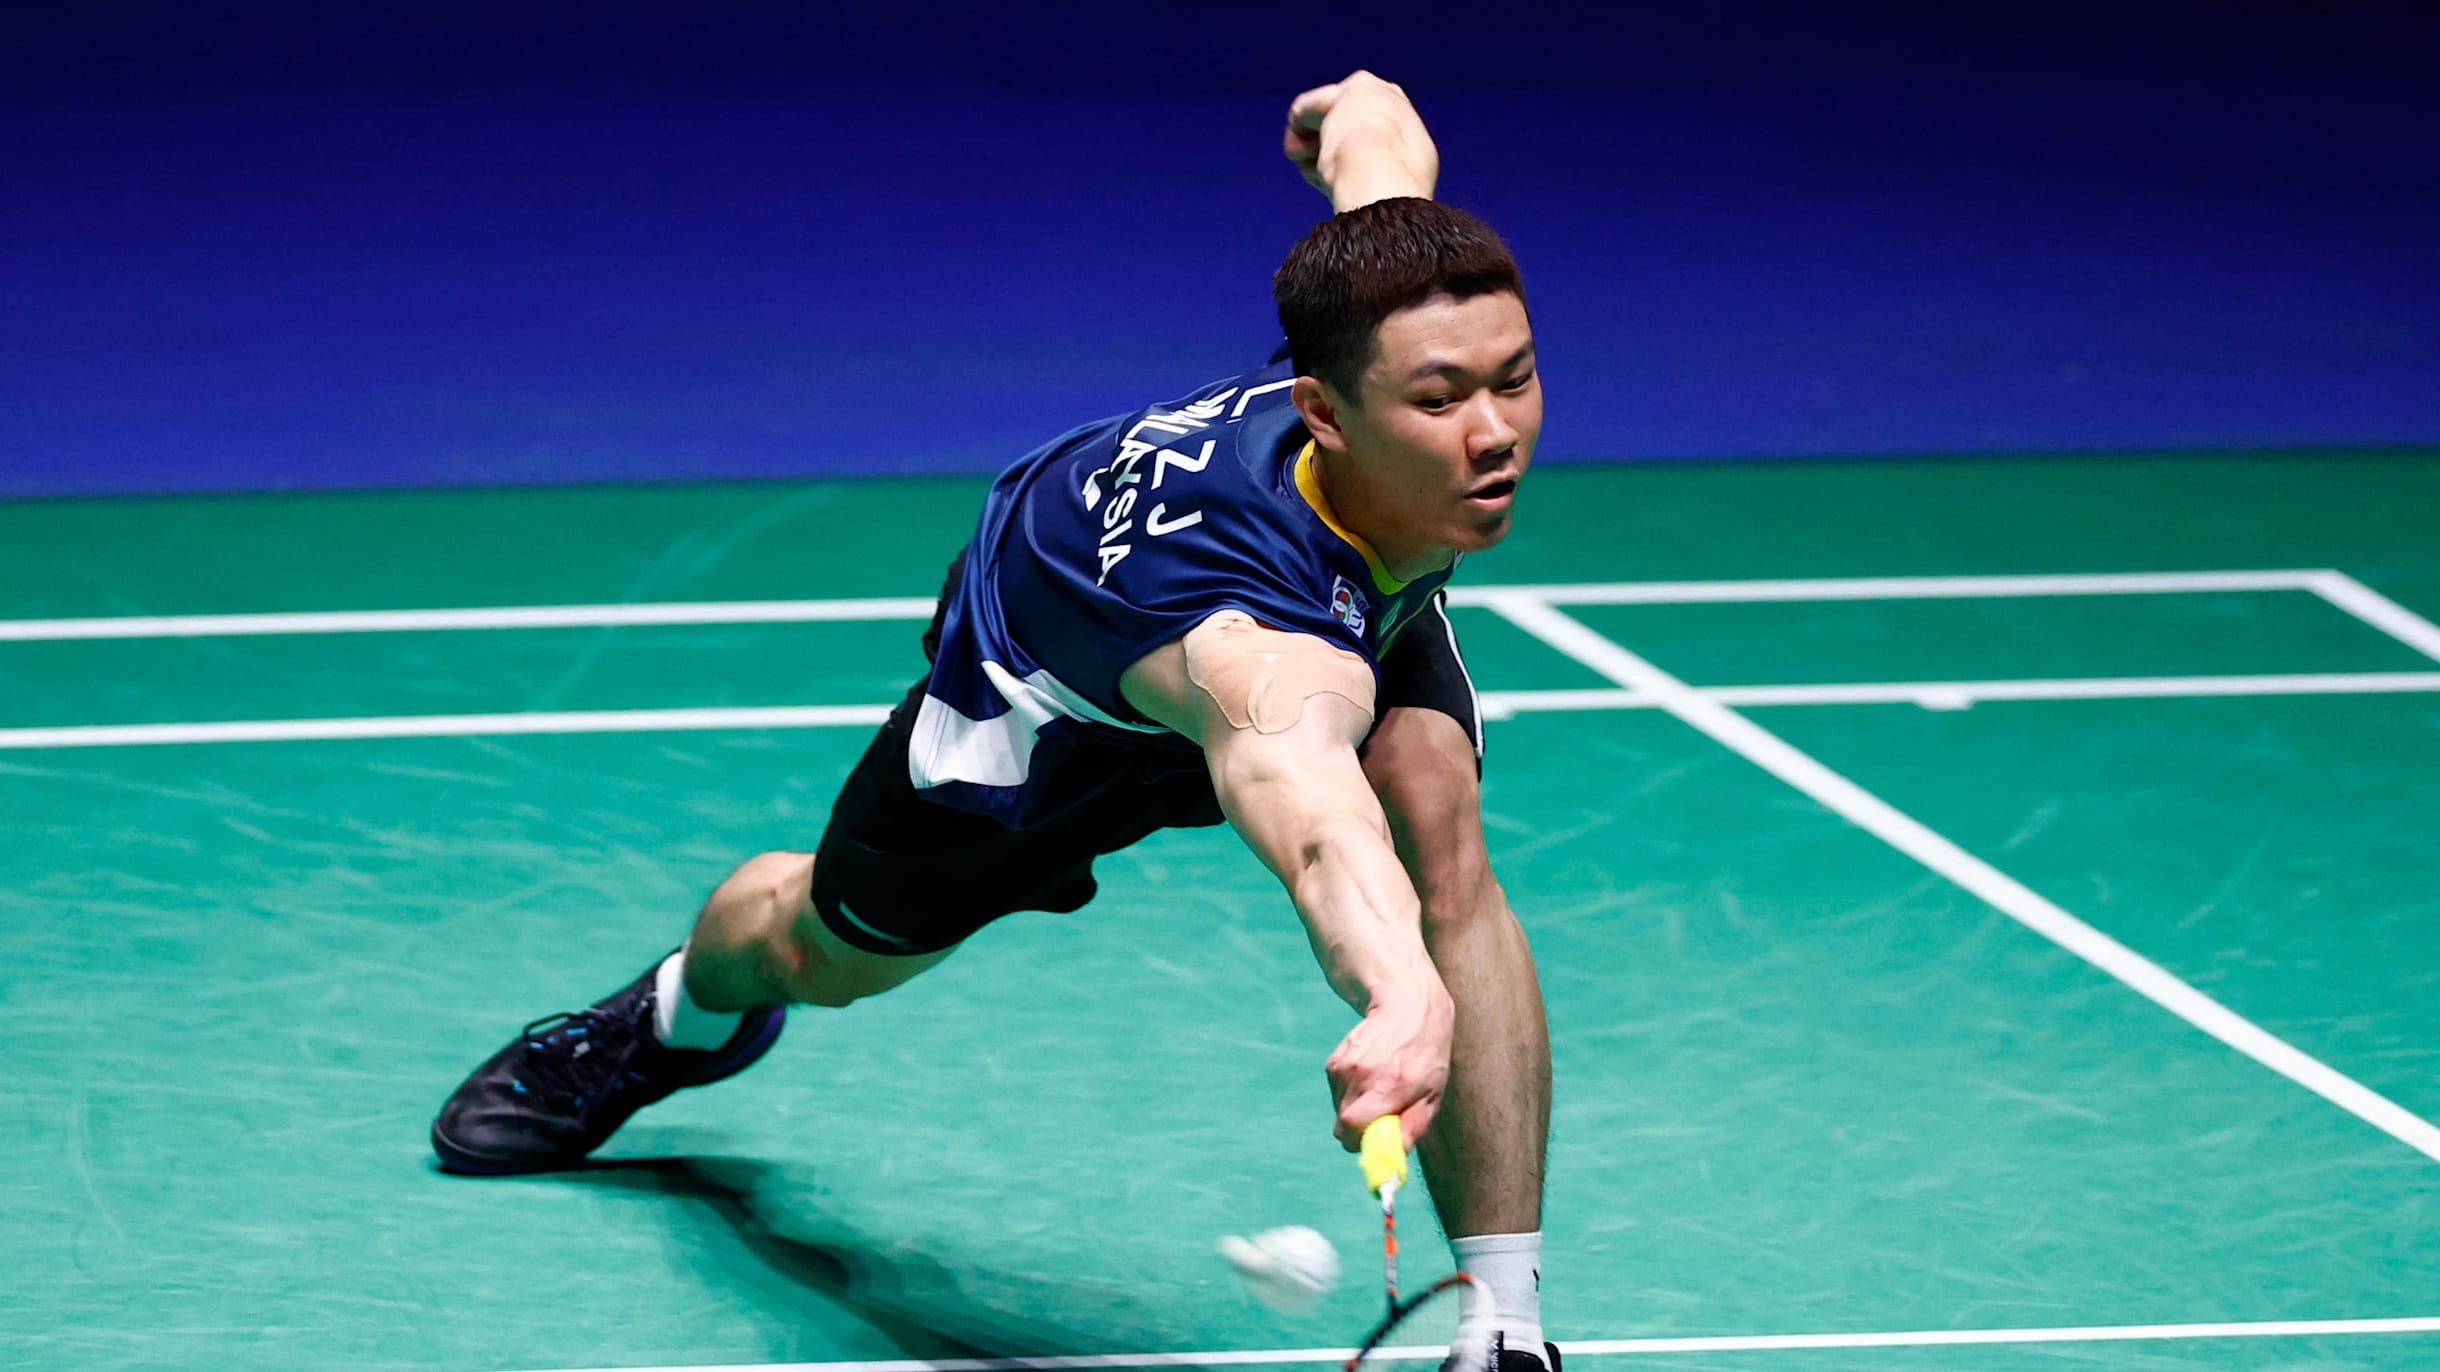 BWF Korea Open 2023 Lee Zii Jias return to competition ends in first-round defeat, Loh Kean Yew through